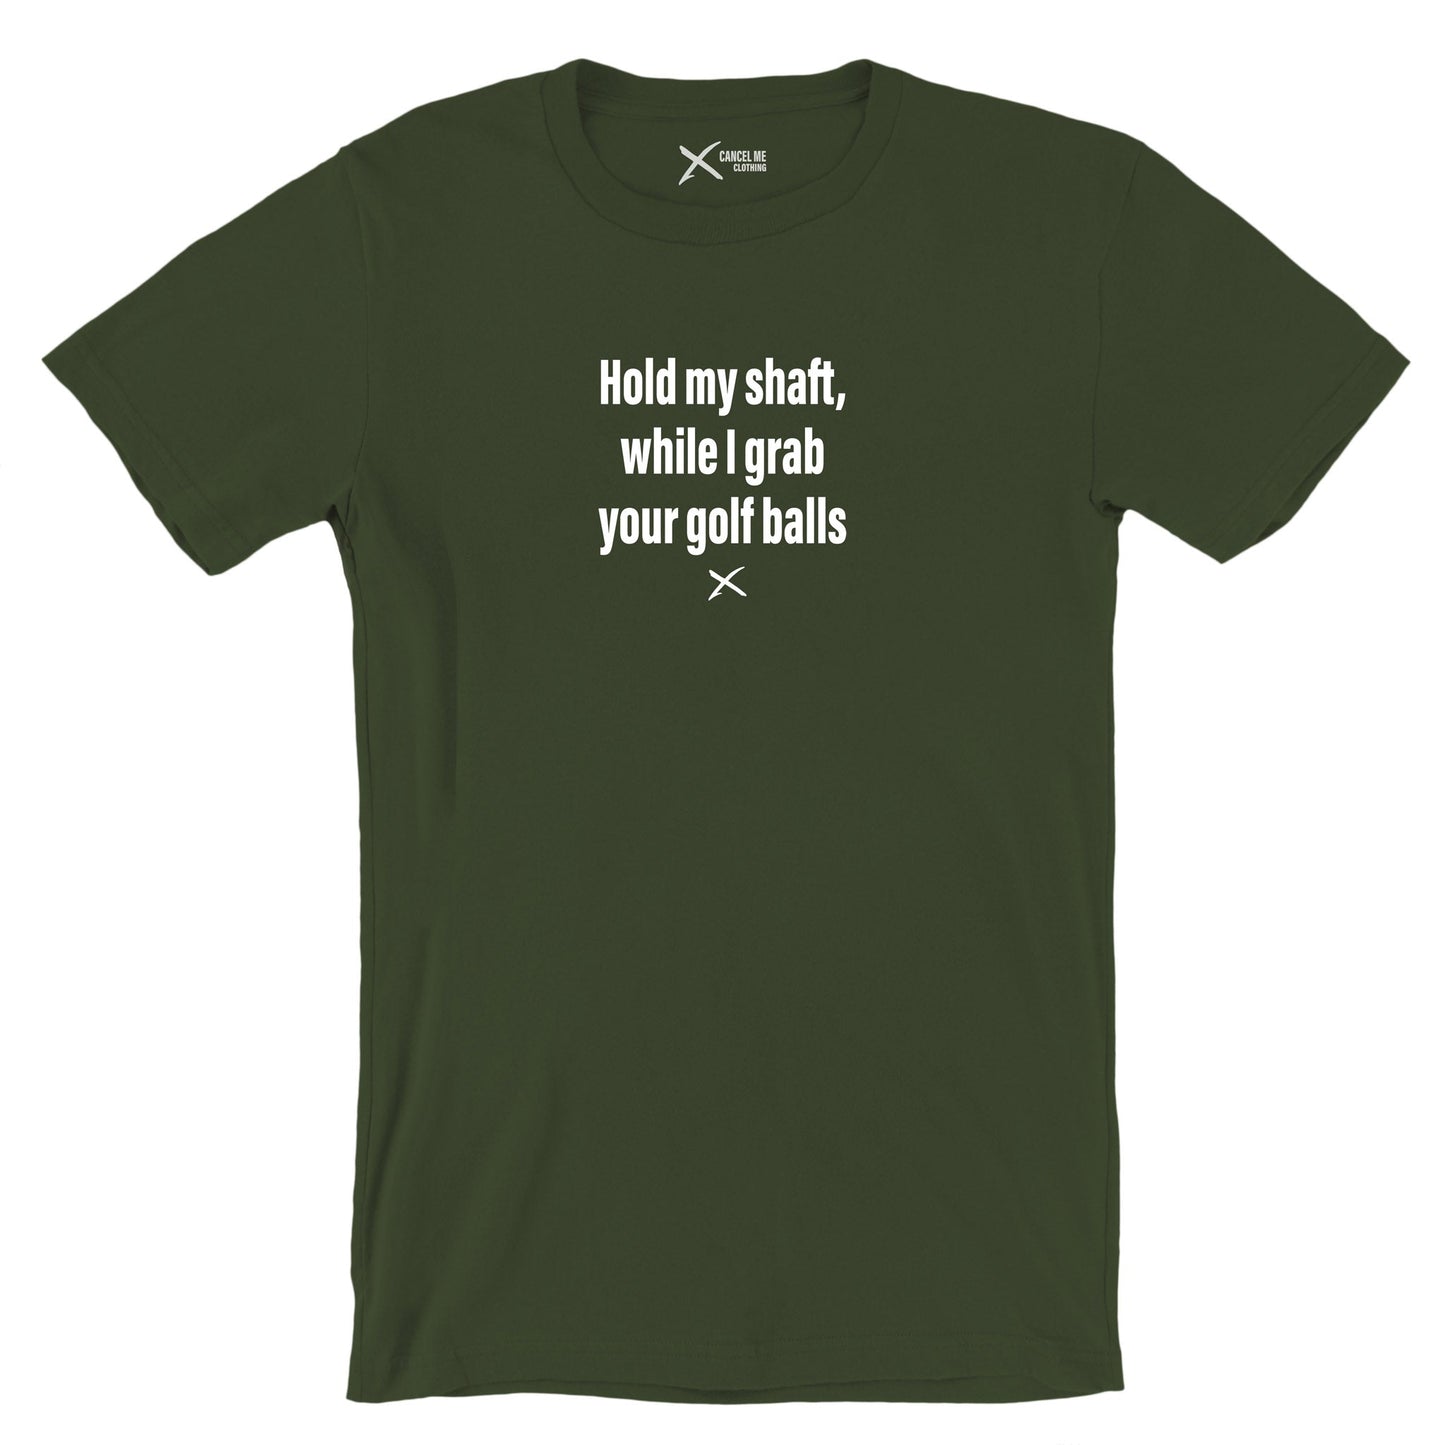 Hold my shaft, while I grab your golf balls - Shirt